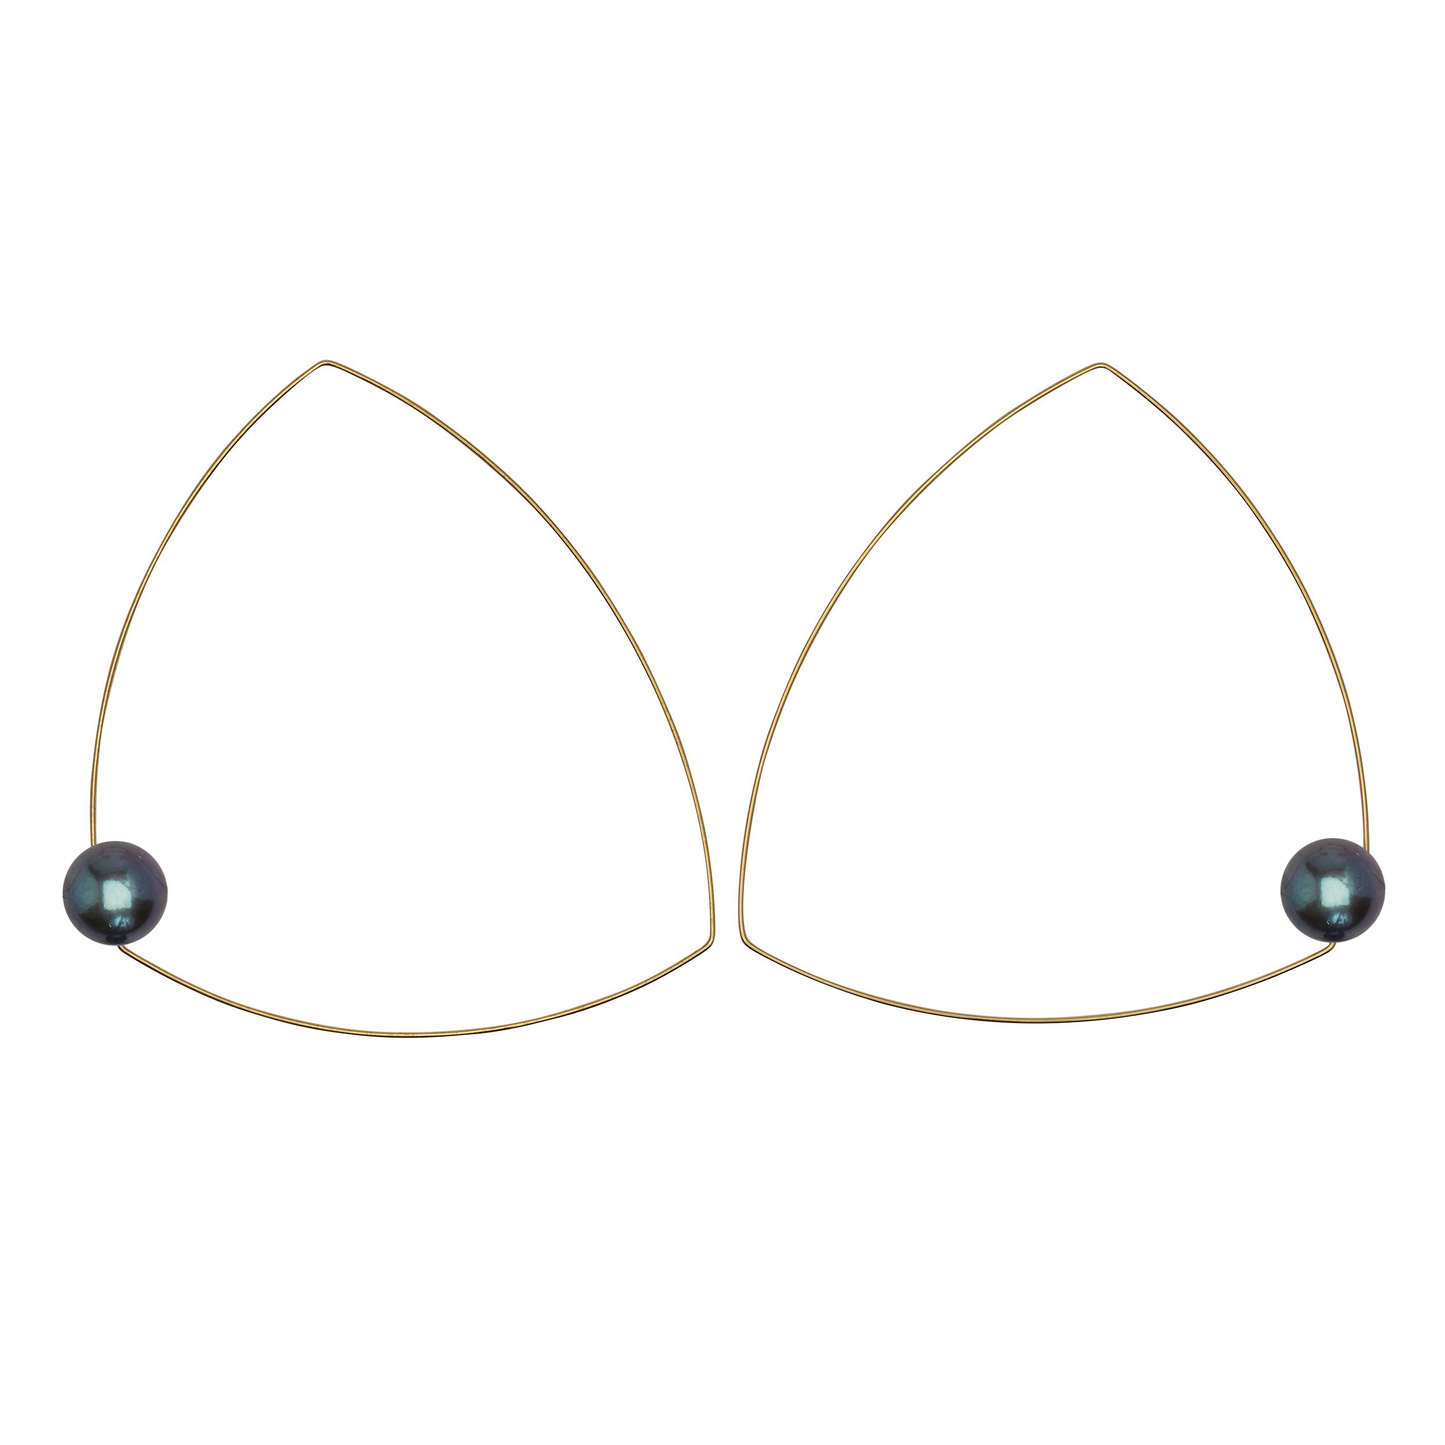 Wide Triangle Earrings with Round Fresh Water Pearl (12mm)